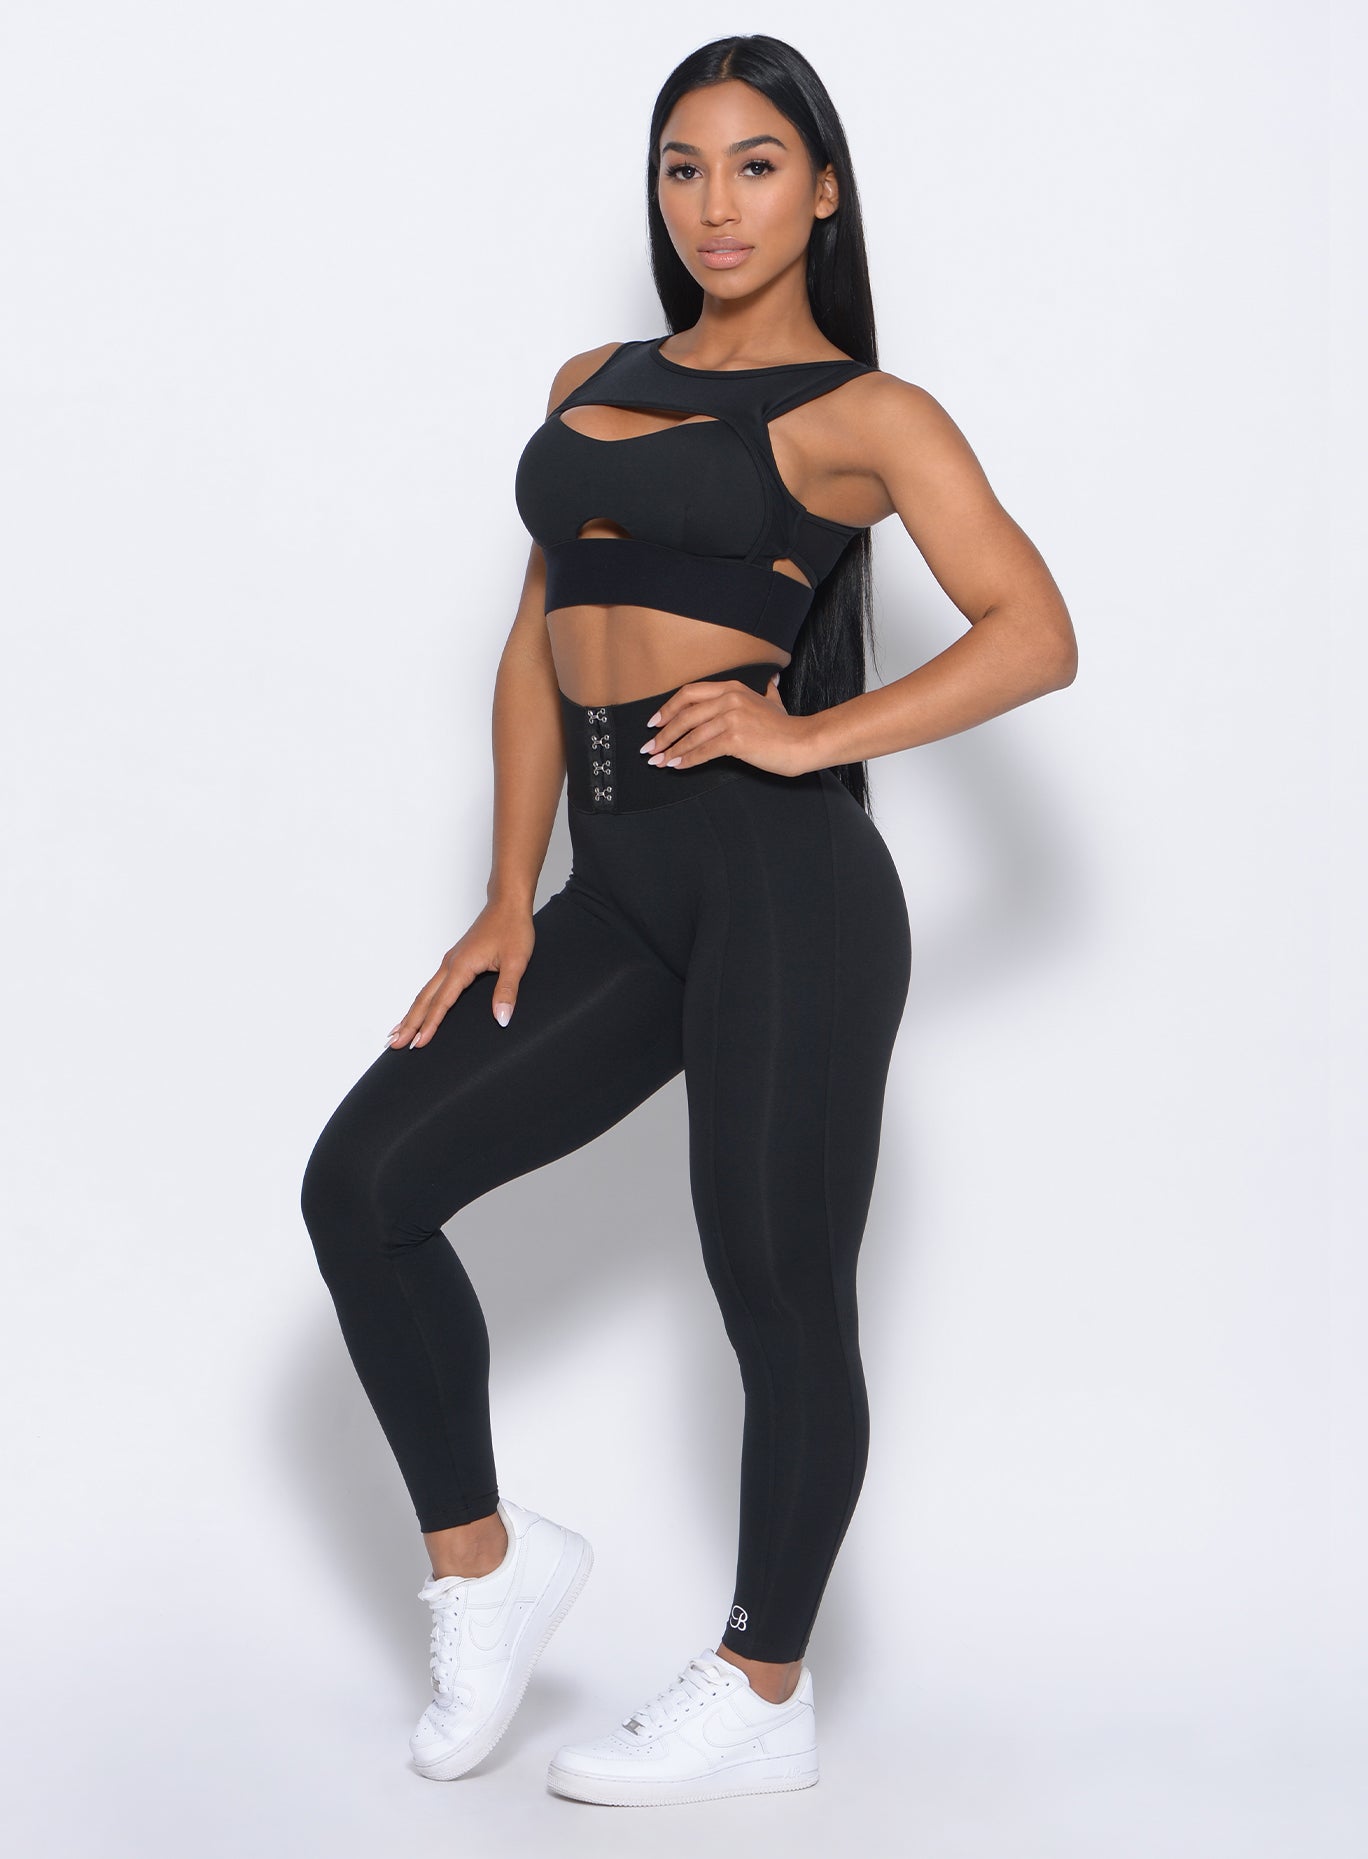 Left side view of the model angled left wearing  our volume sports bra and a black leggings